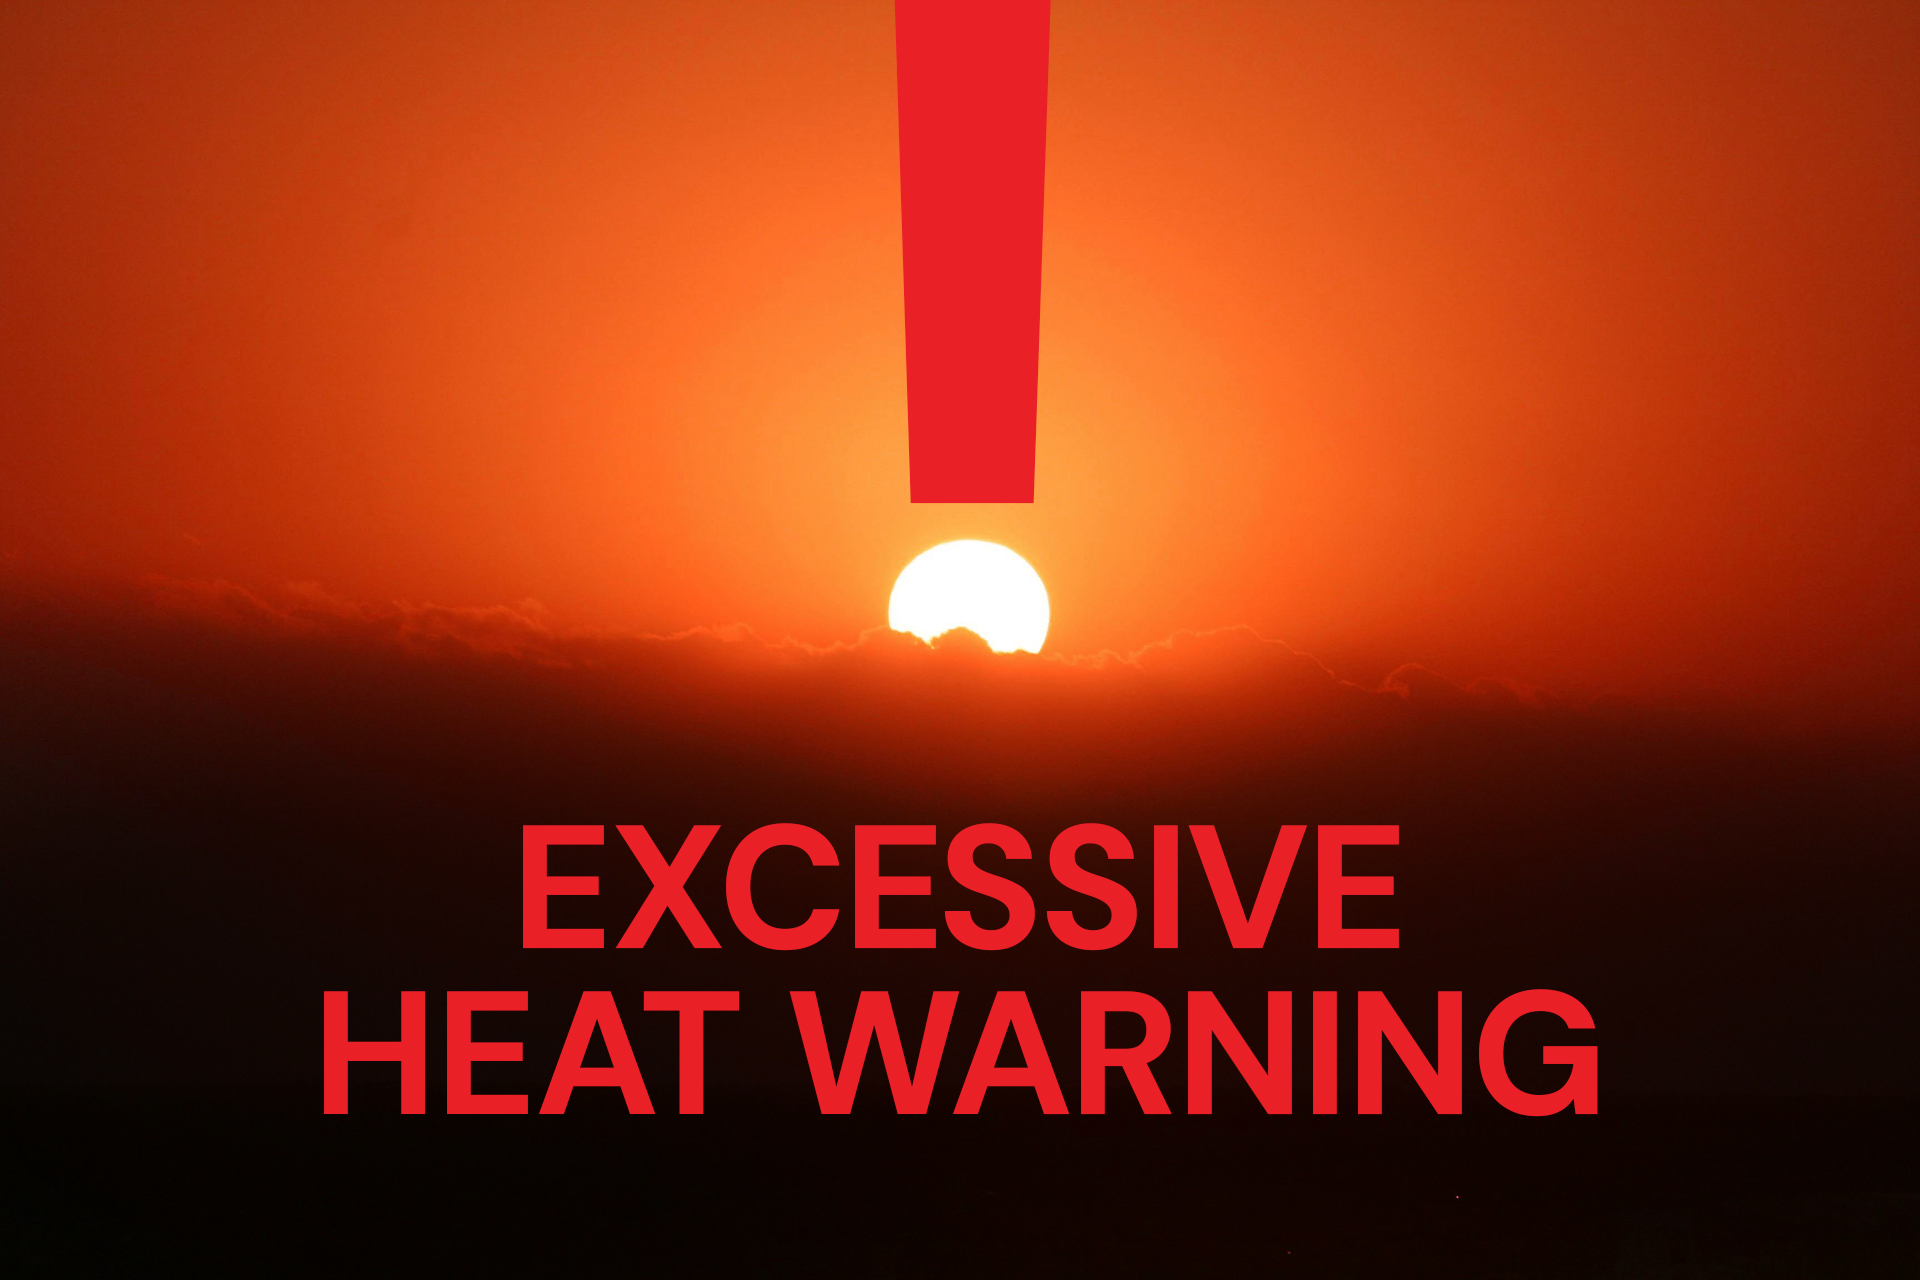 Excess Heat Warning: A Picture of the Sun